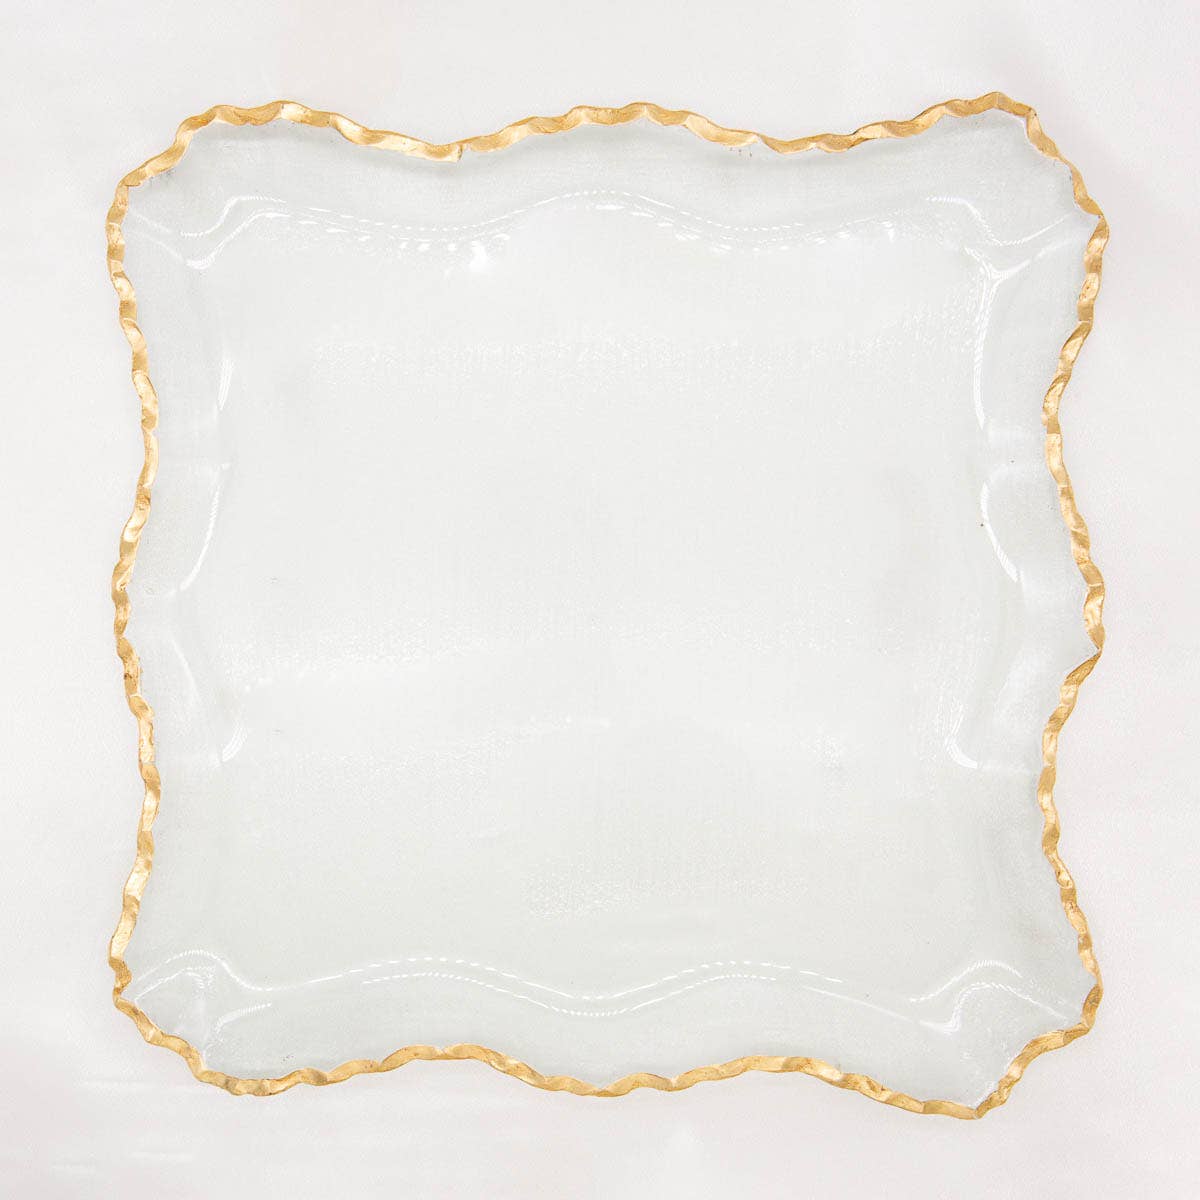 Montague Square Serving Tray   Clear/Gold   12x12